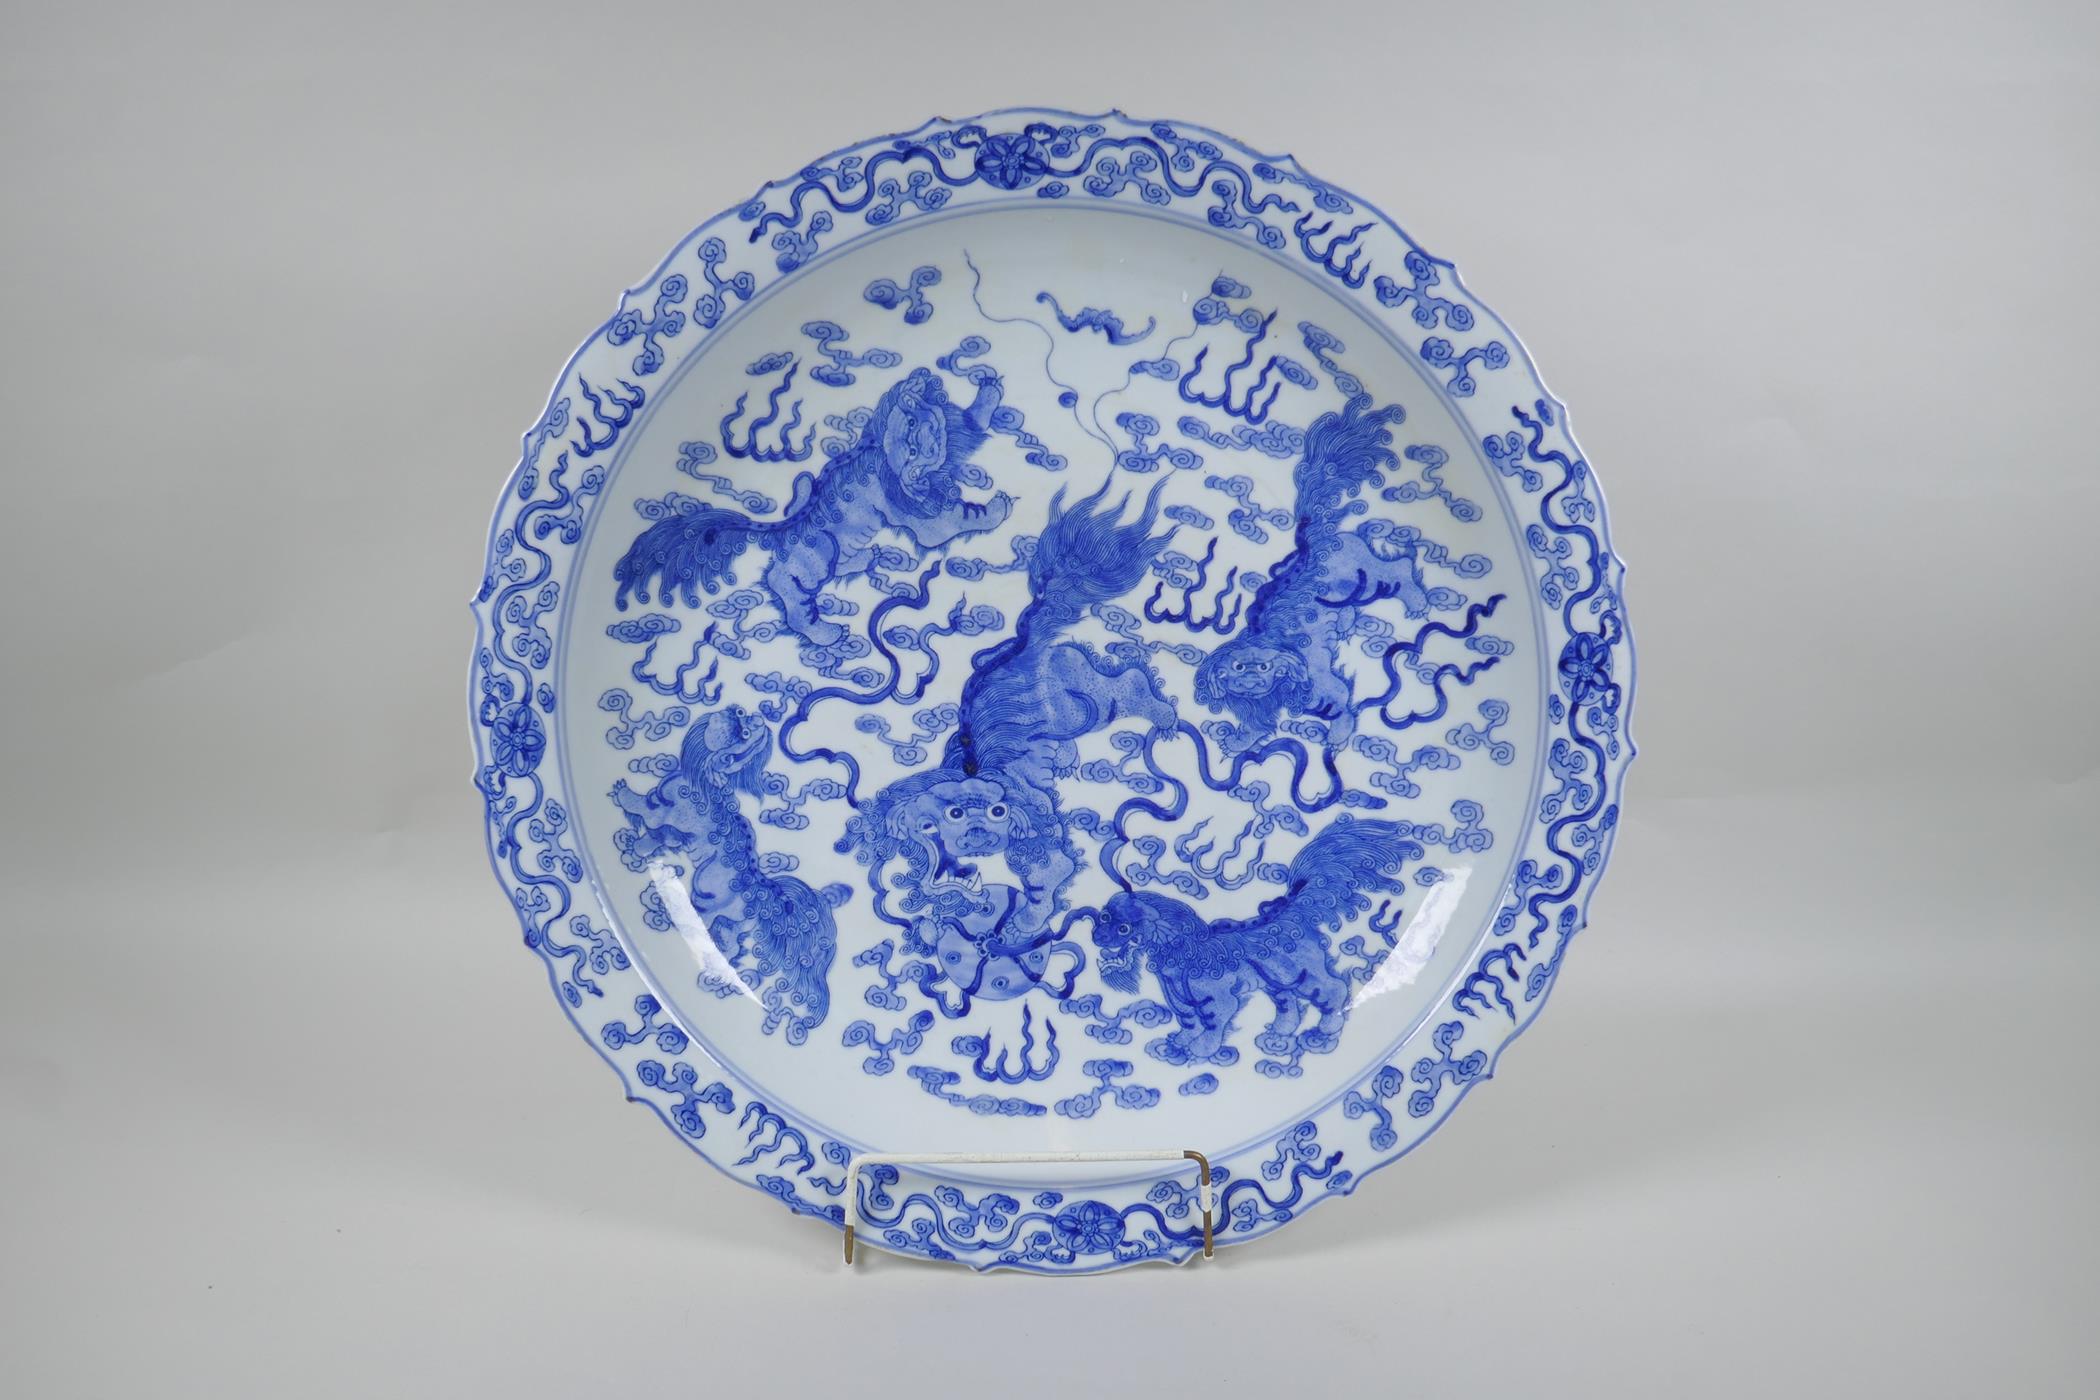 A blue and white porcelain charger with lobed rim and kylin decoration, Chinese KangXi 6 character